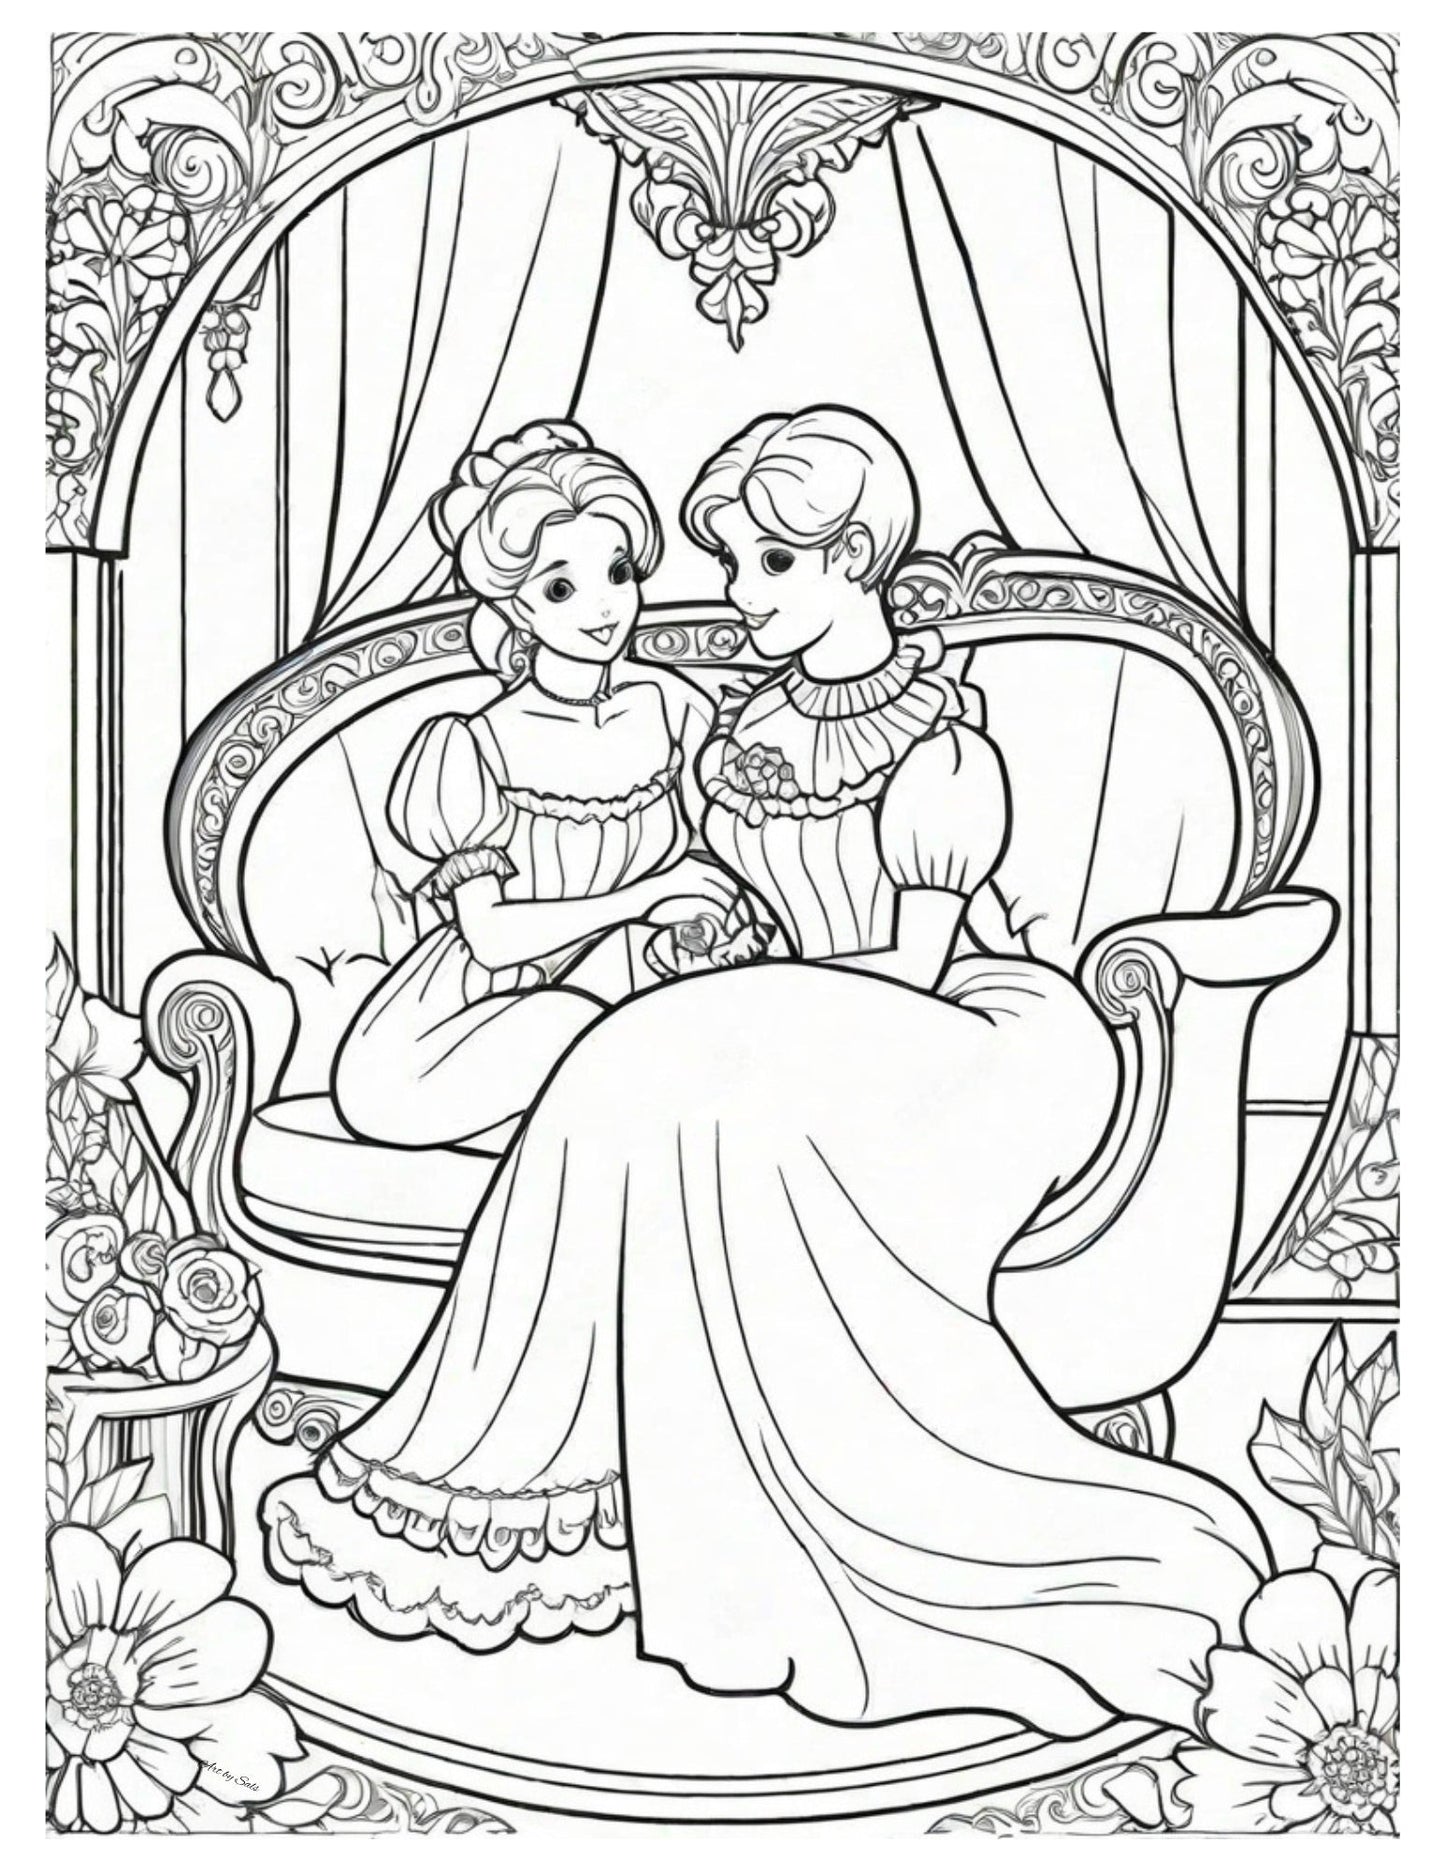 Adult Coloring Pages - 20 Printable pages - A Homespun Hobby